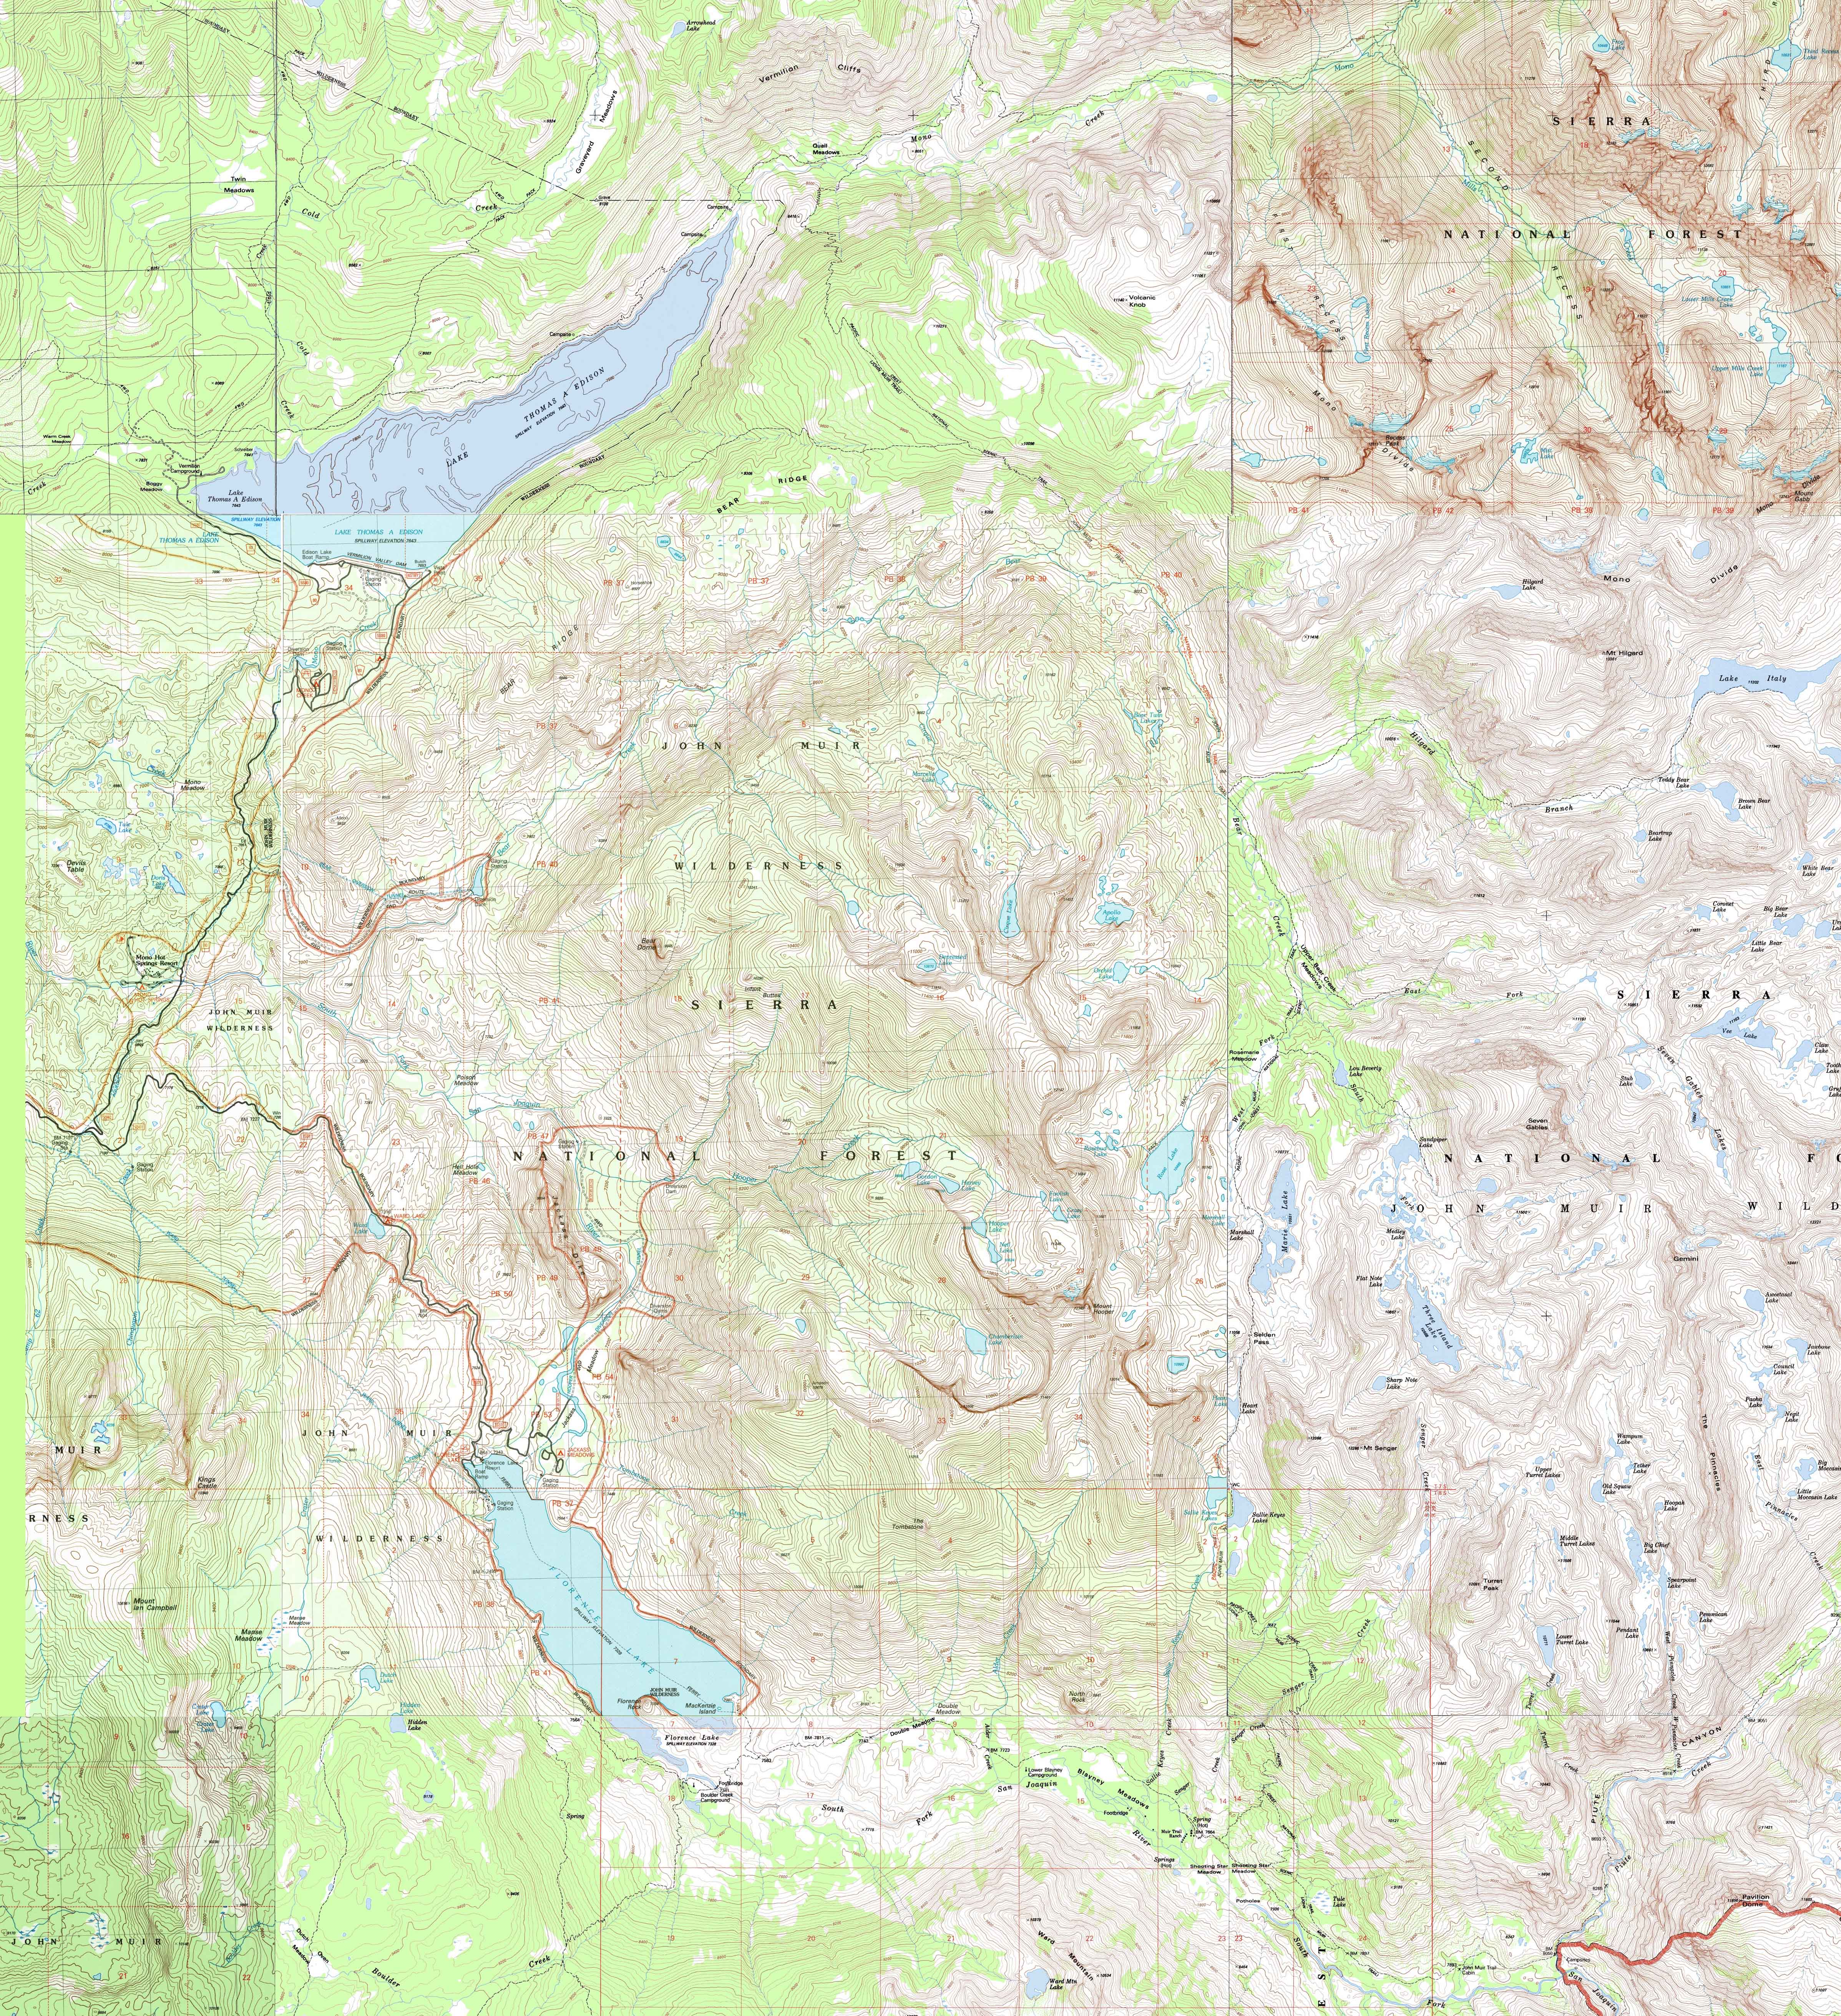 Backpacking map of JMT from Vermilion Valley to Muir Ranch.